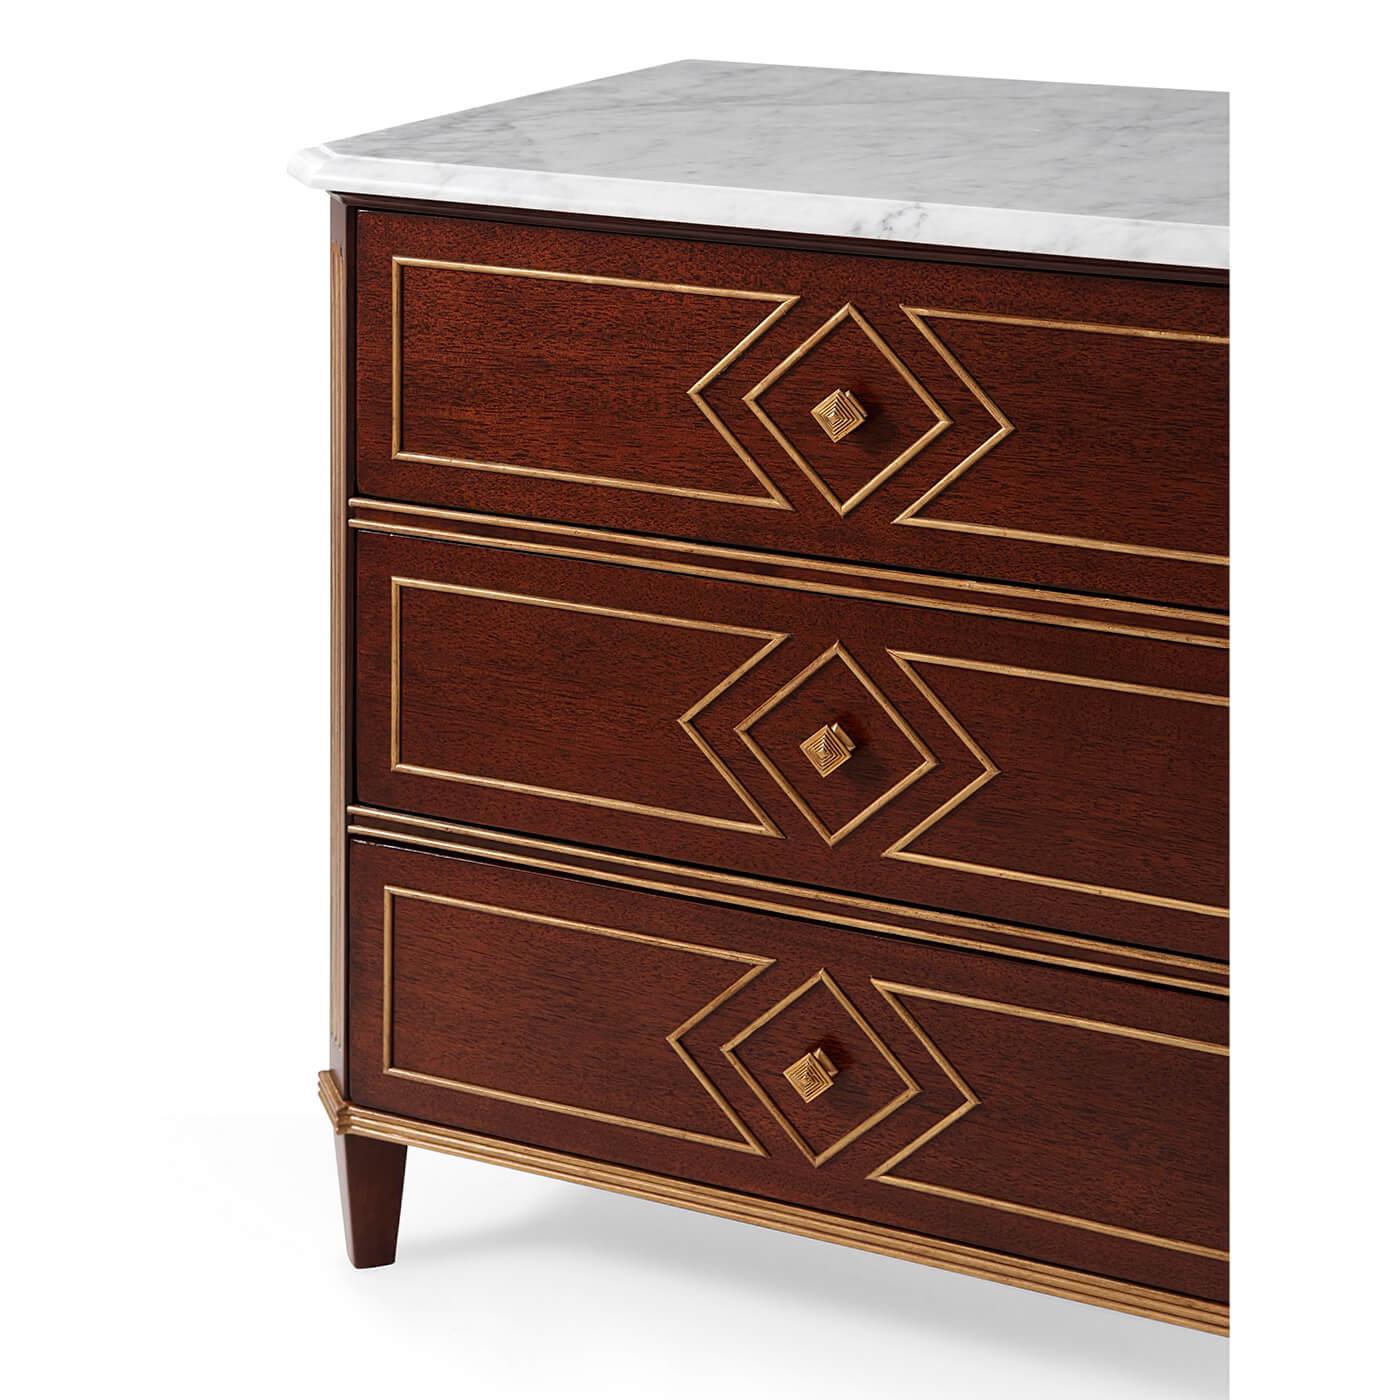 Russian neoclassic style nightstand with a molded edge Carrara marble top, mahogany side with geometric and diamond faceted paneling, with gilt fluted canted corners and raised on square tapered legs.

Dimensions: 28